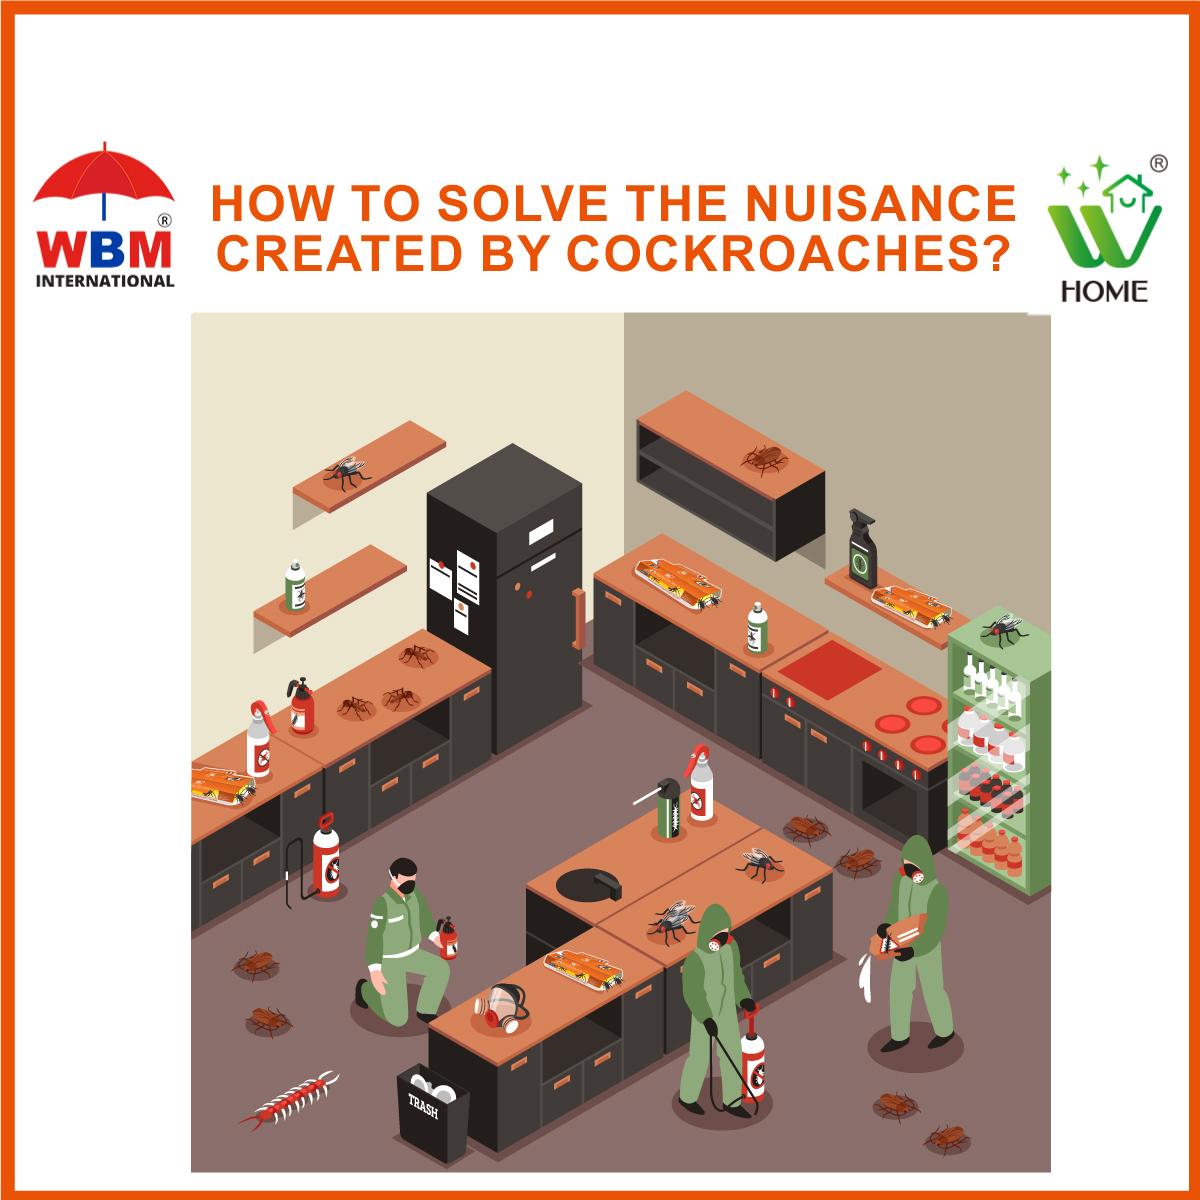 KEEP YOUR HOME AND KITCHEN COCKROACH-FREE BY WBM INTERNATIONAL